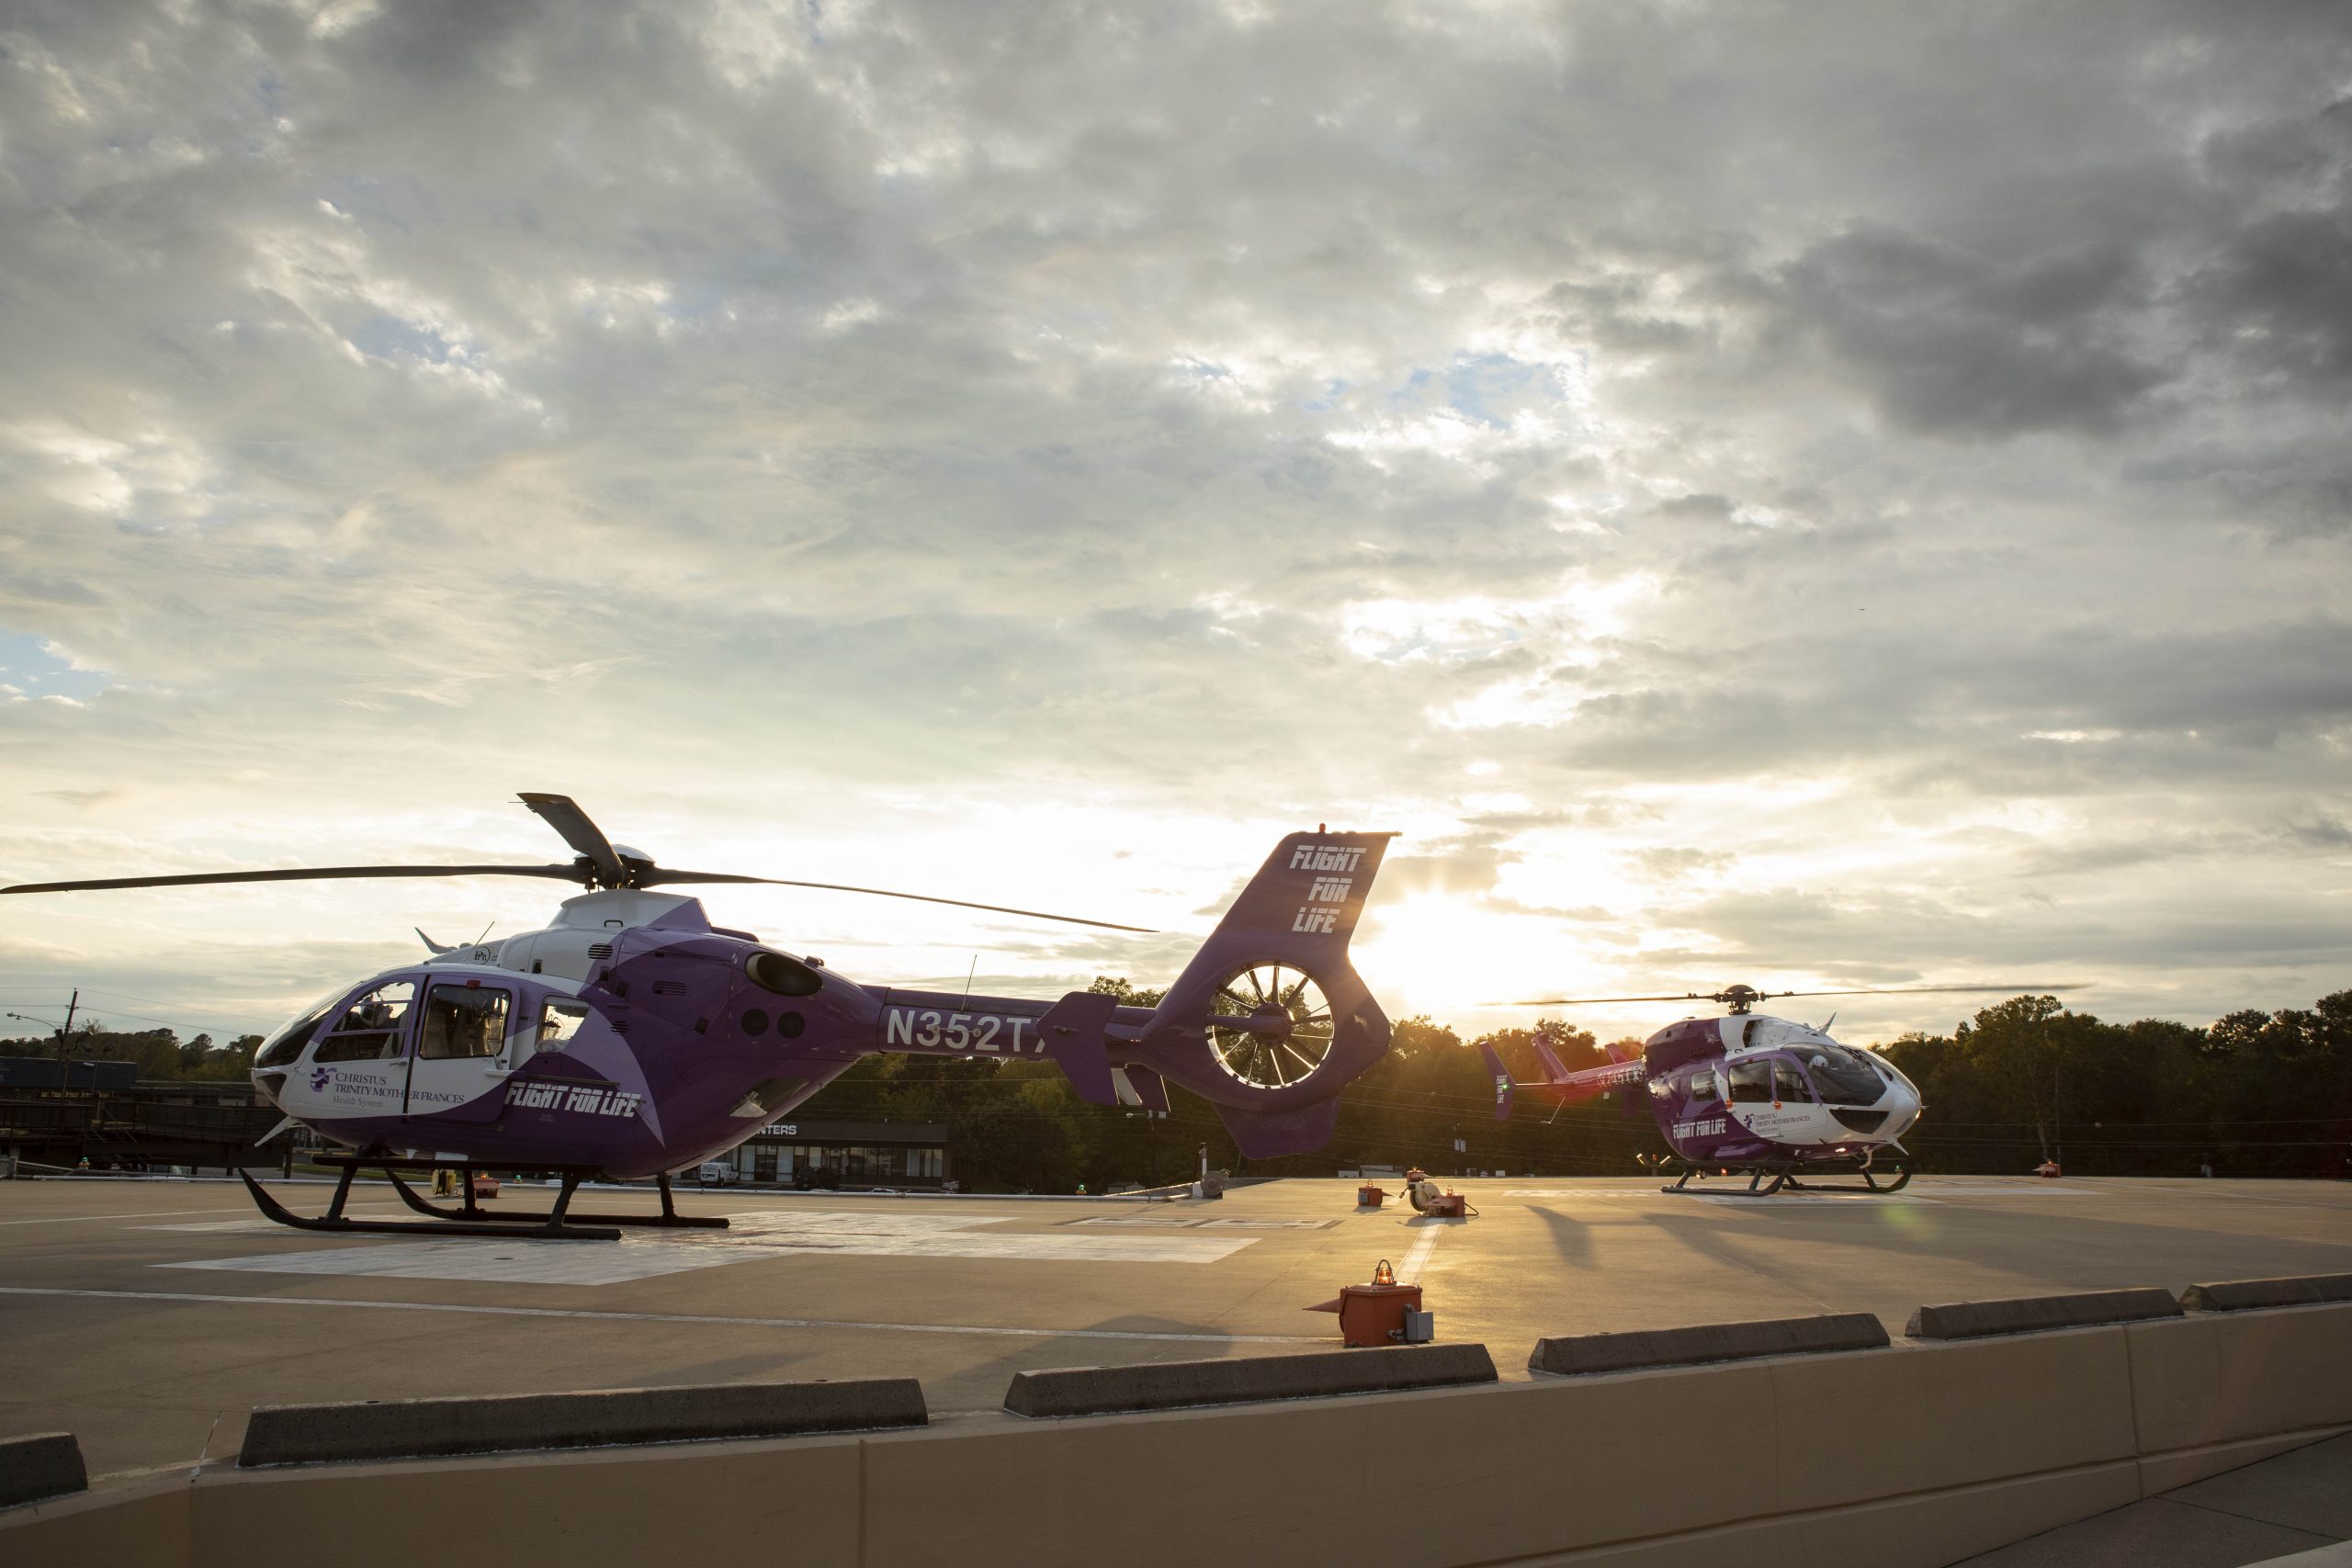 Two medical helicopters sit on a landing pad as the sun sets in the background.